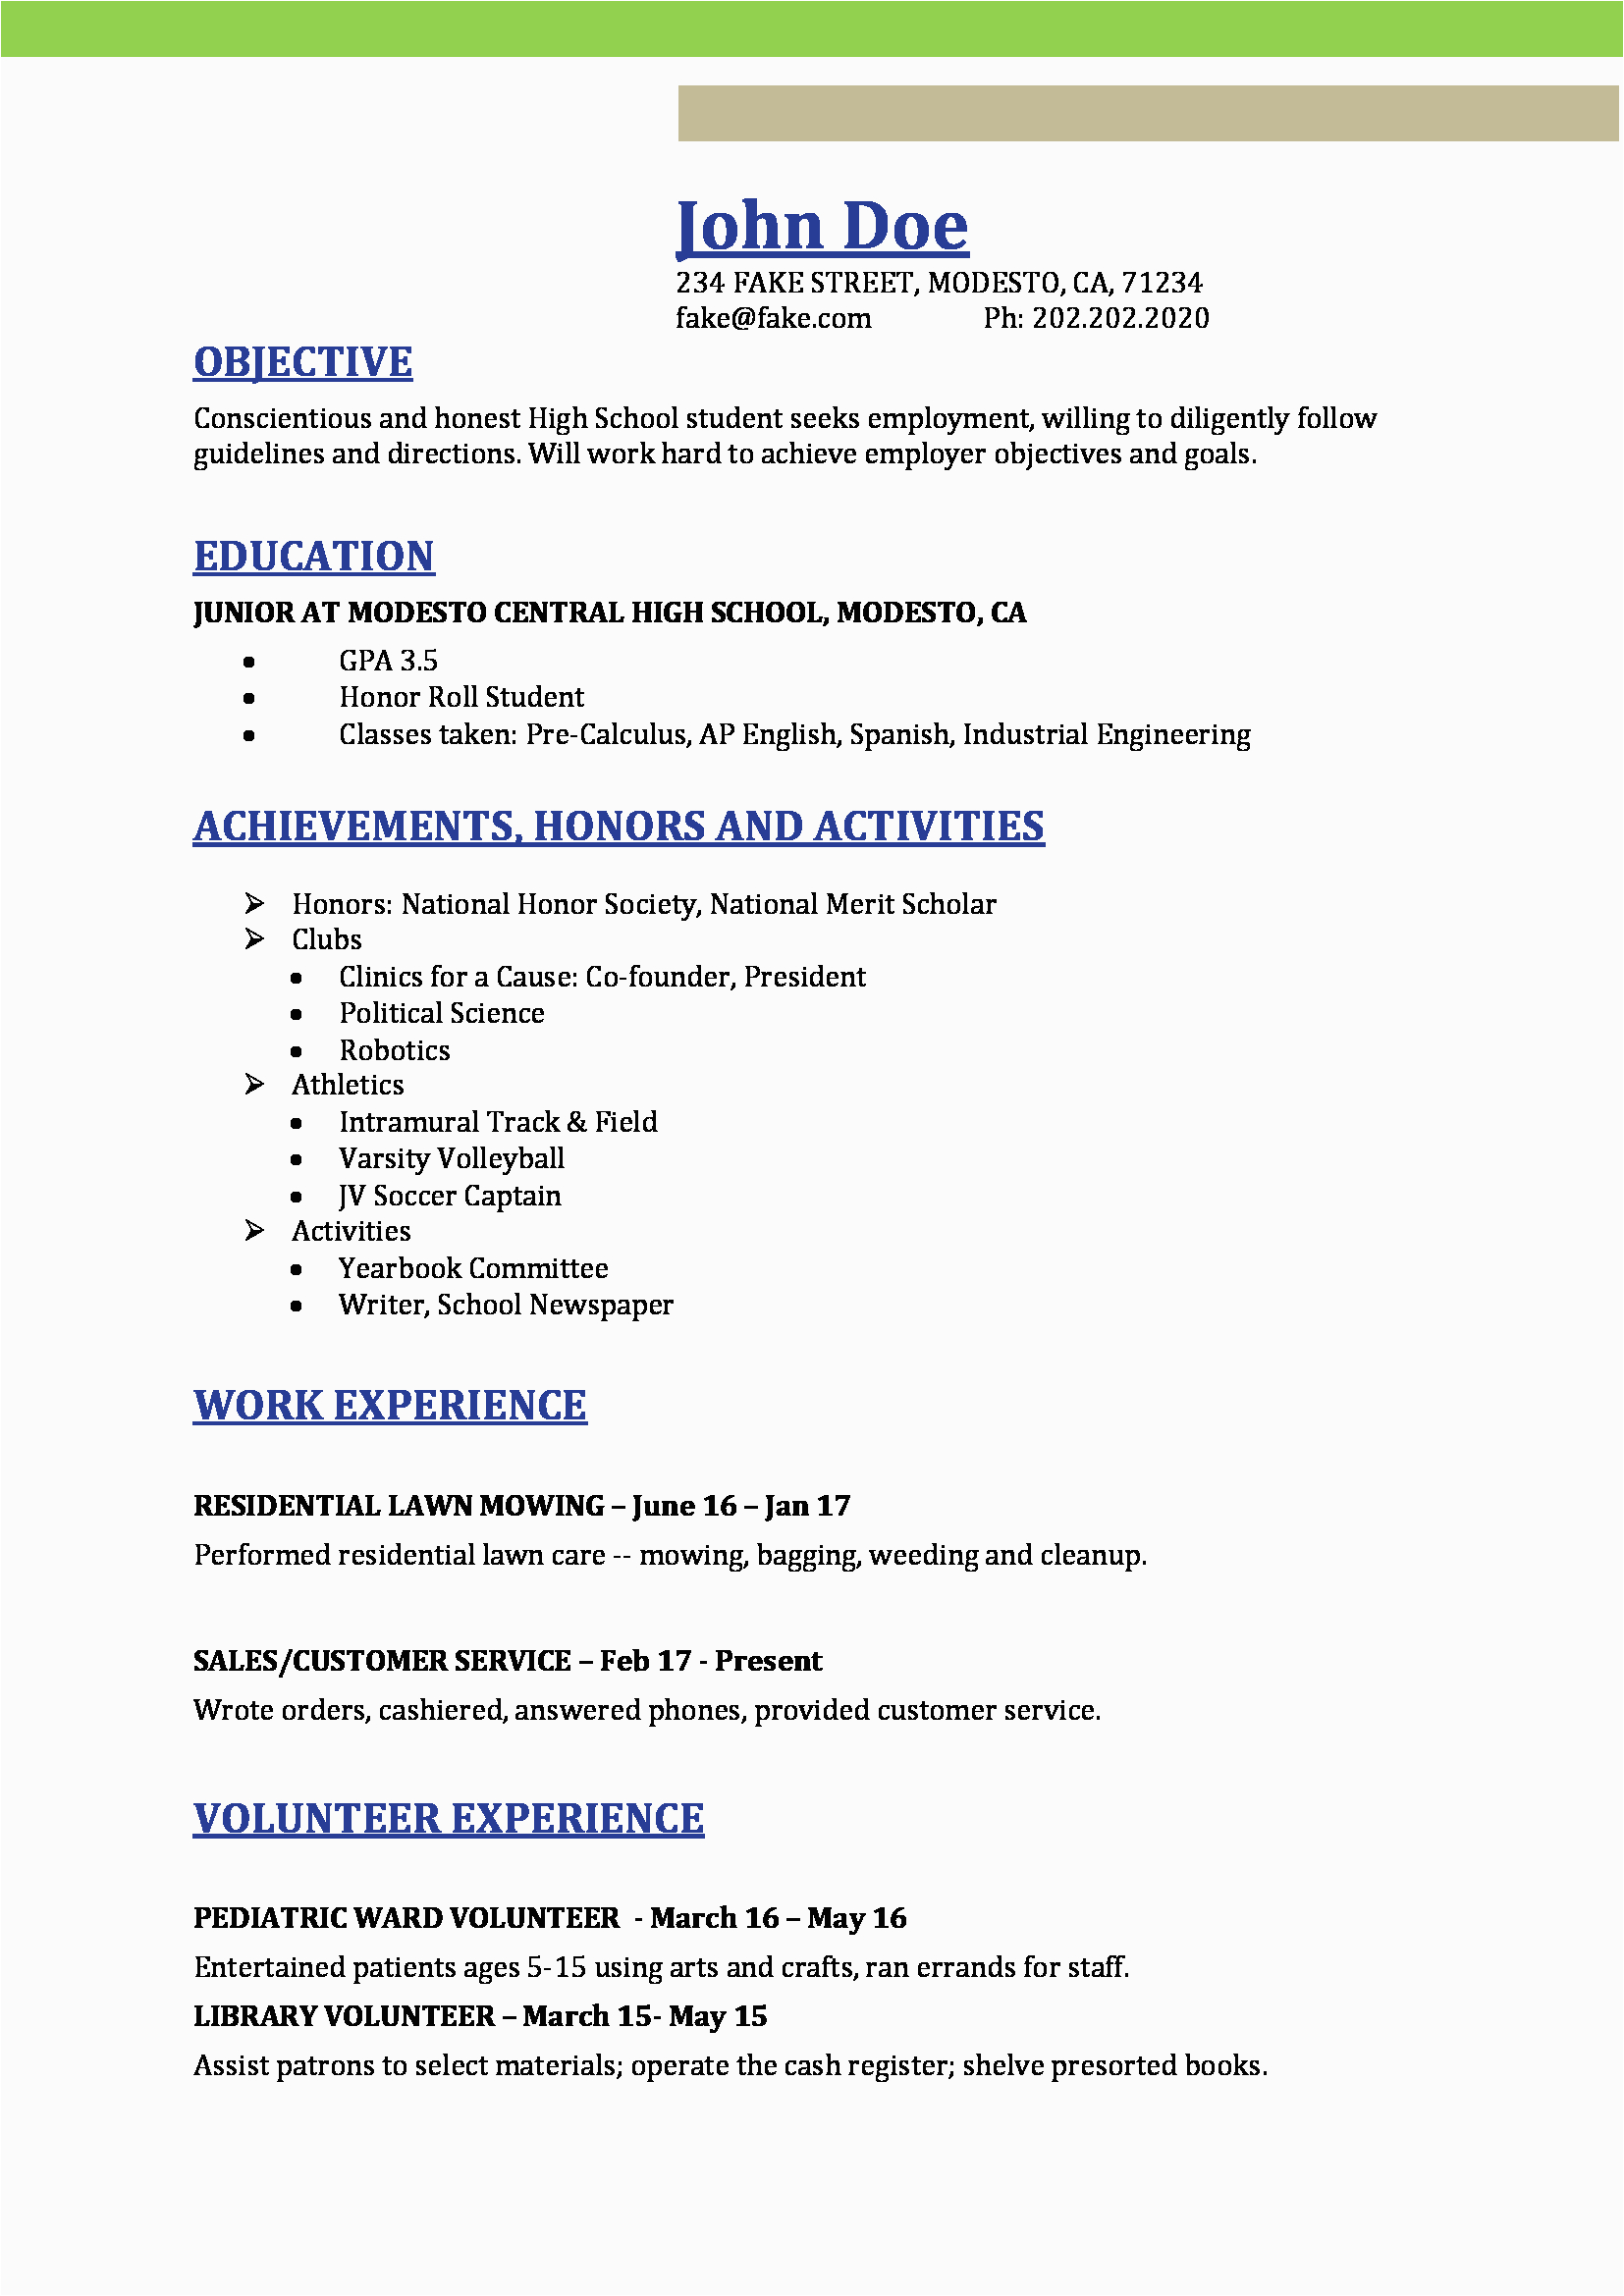 Resume Templates for Highschool Students with Little Experience High School Resume Resumes Perfect for High School Students